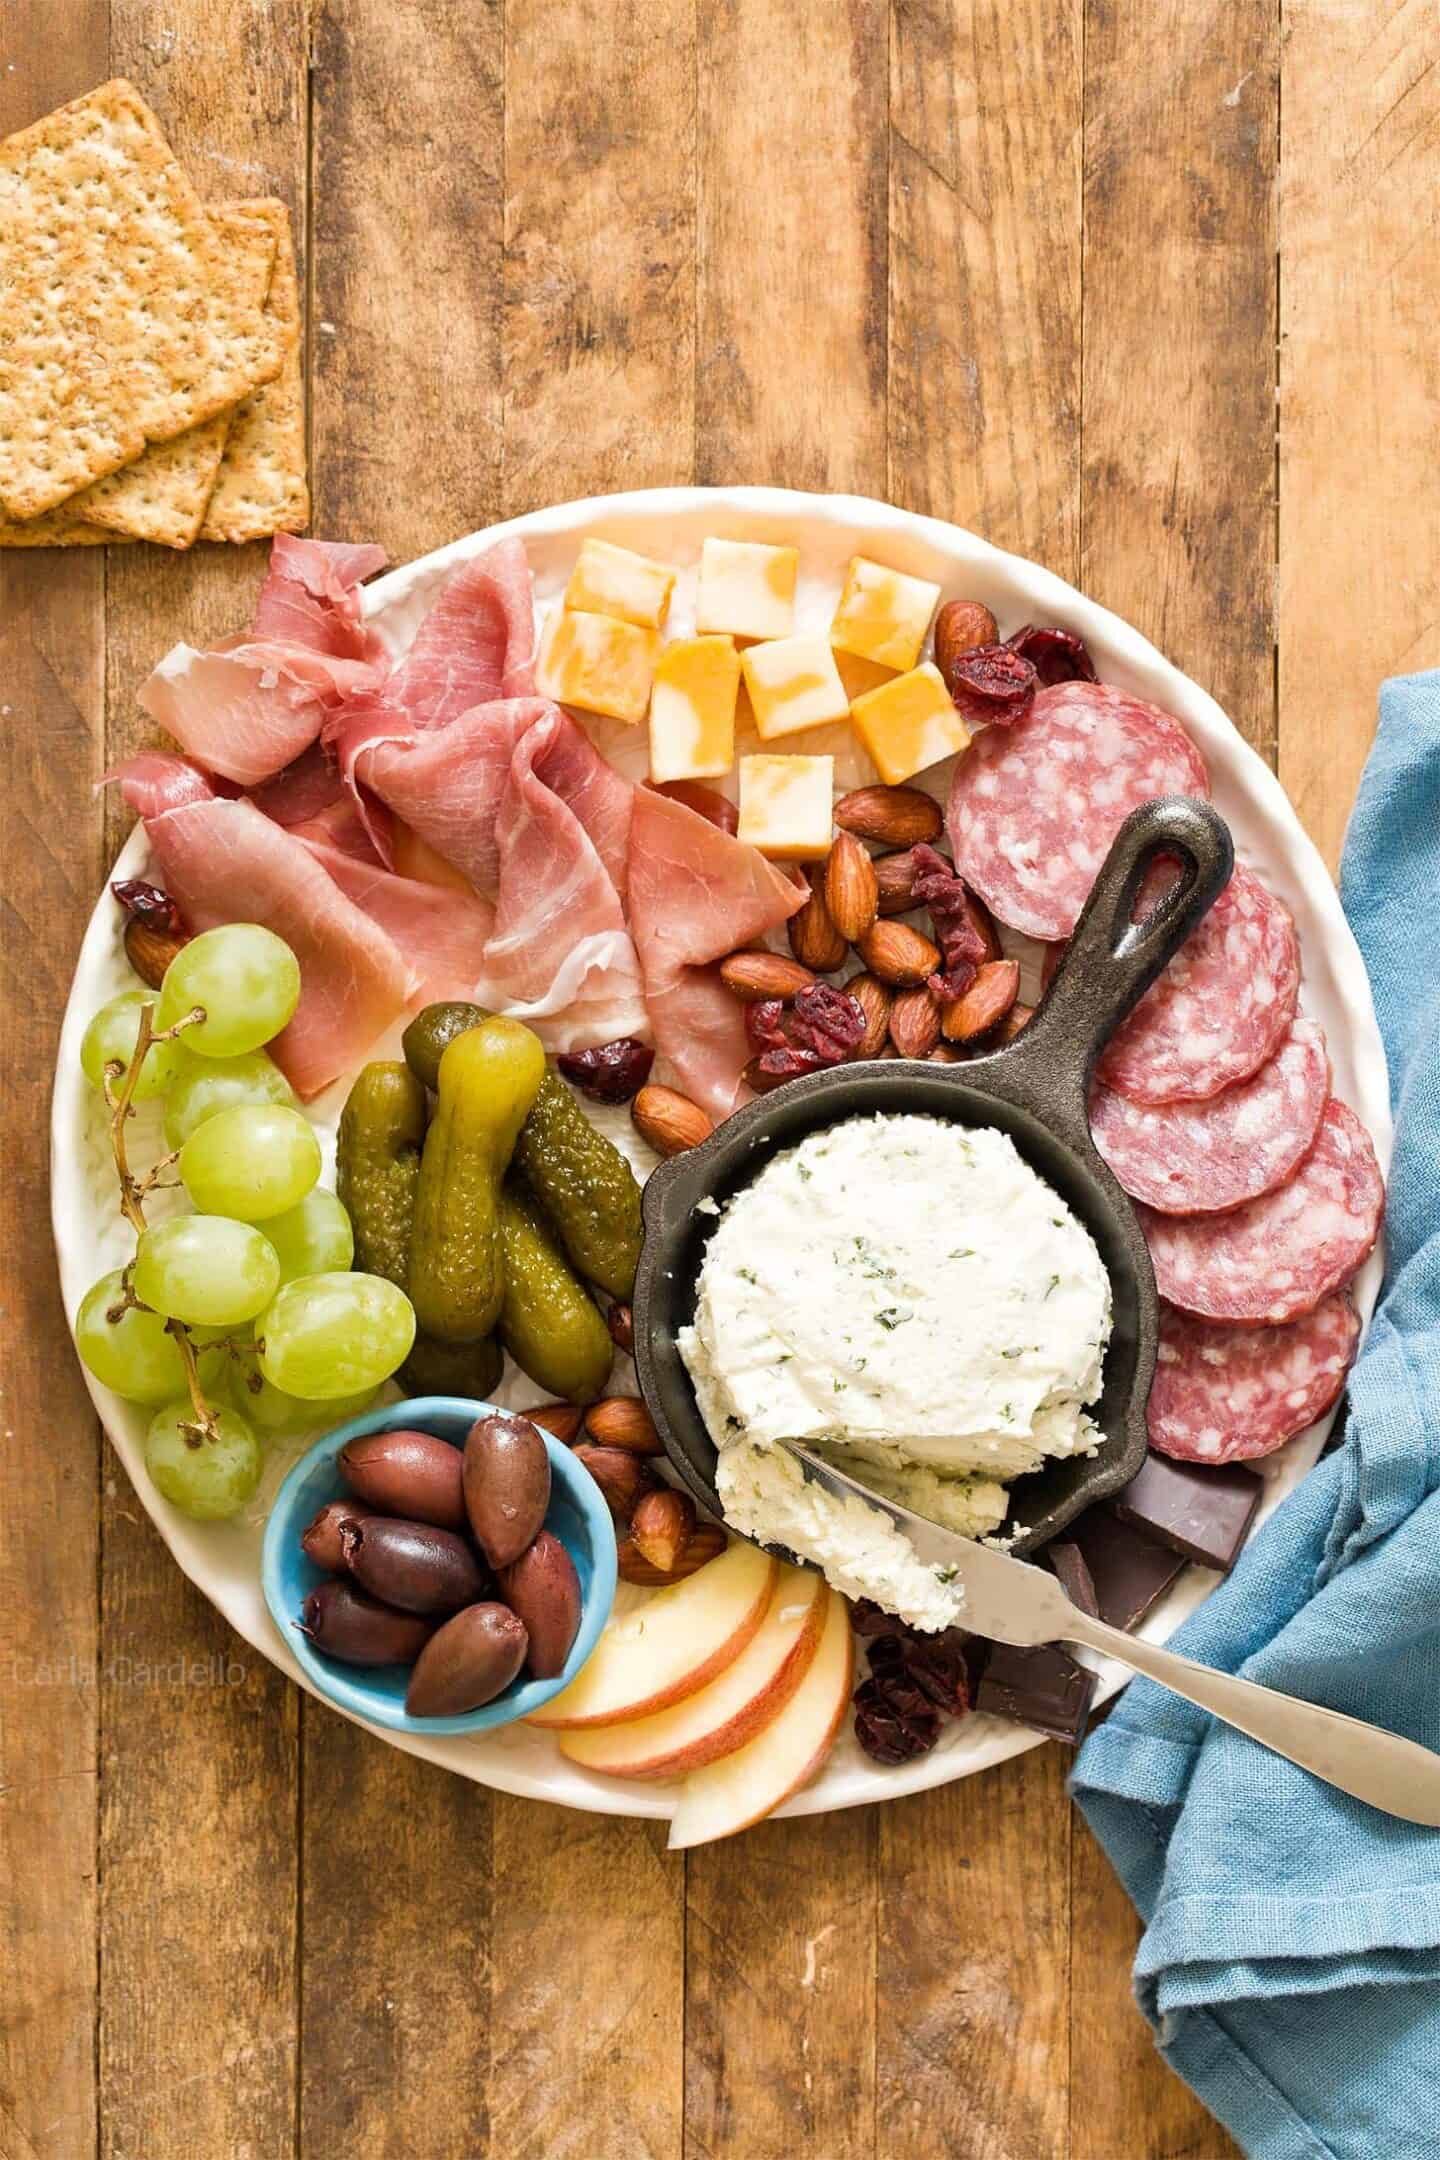 An assortment of cheeses, cured meats, nuts, and fruits neatly arranged on a serving platter.